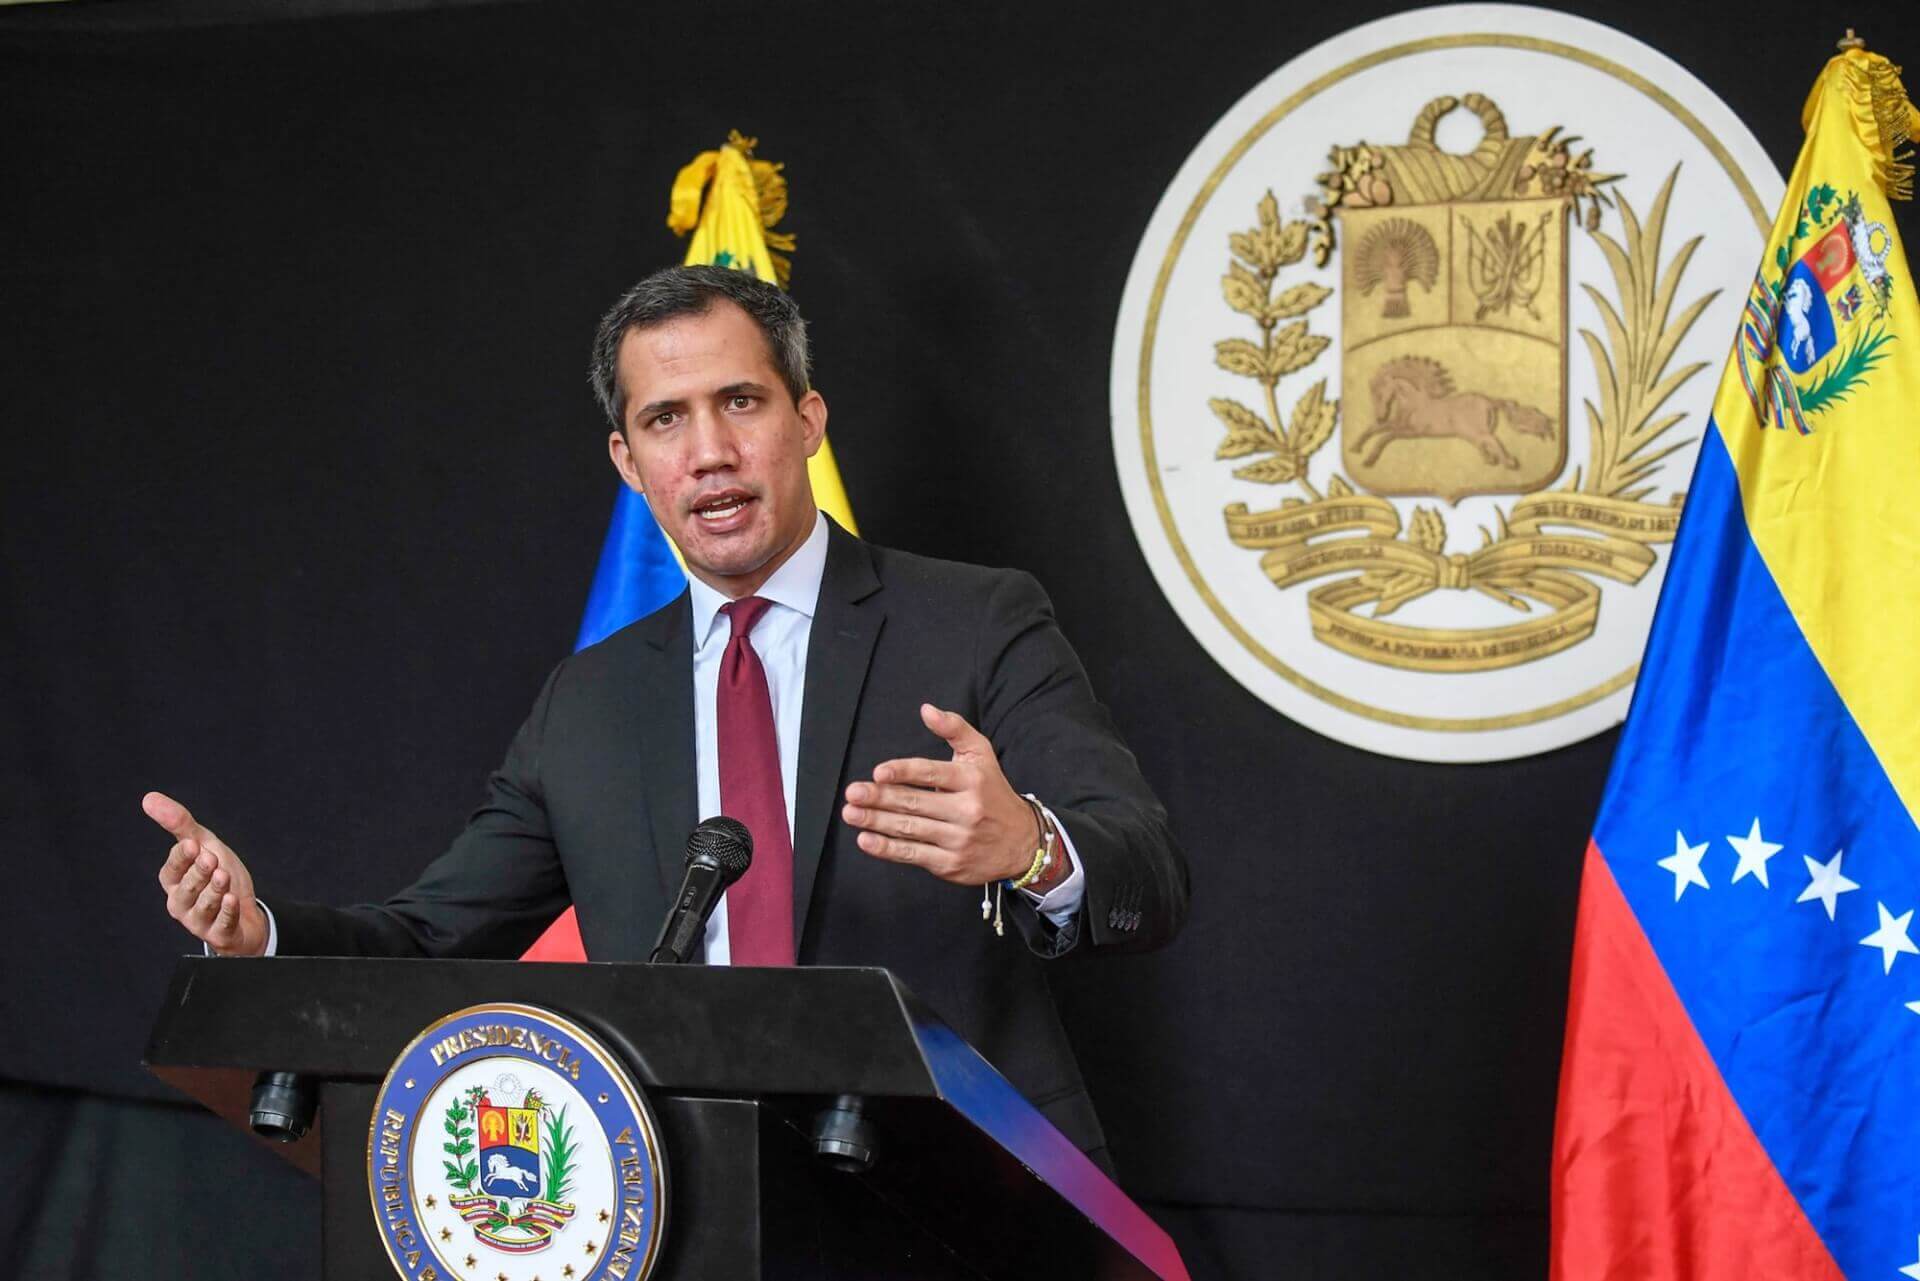 Venezuelan Opp. Leader Guaidó Calls for Sanctions Relief to Initiate Dialogue With Maduro